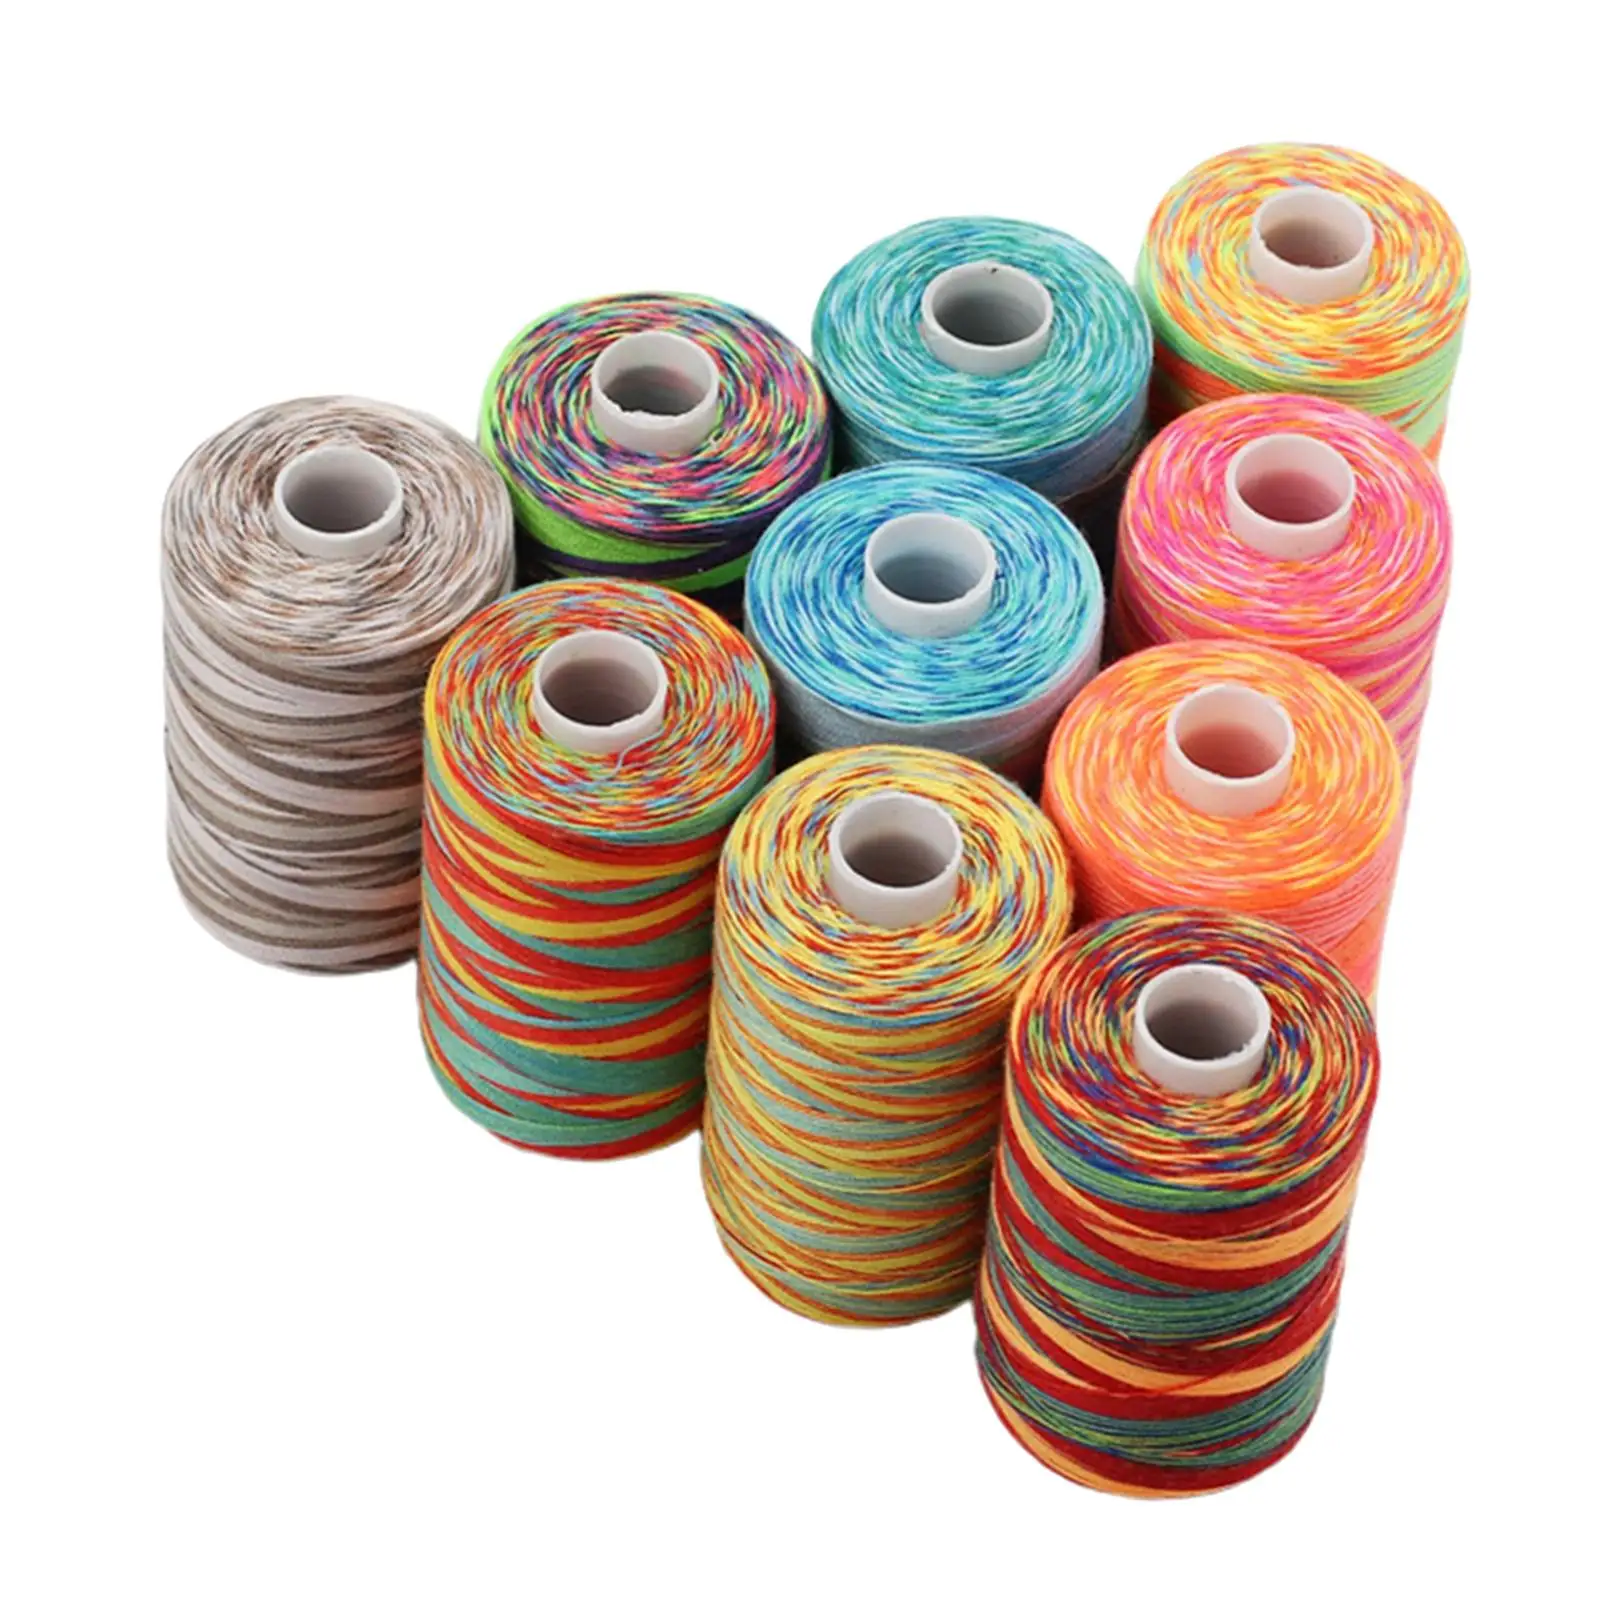 10x Sewing Thread Spool Sewing Thread for Overlock Stitching  Knitting